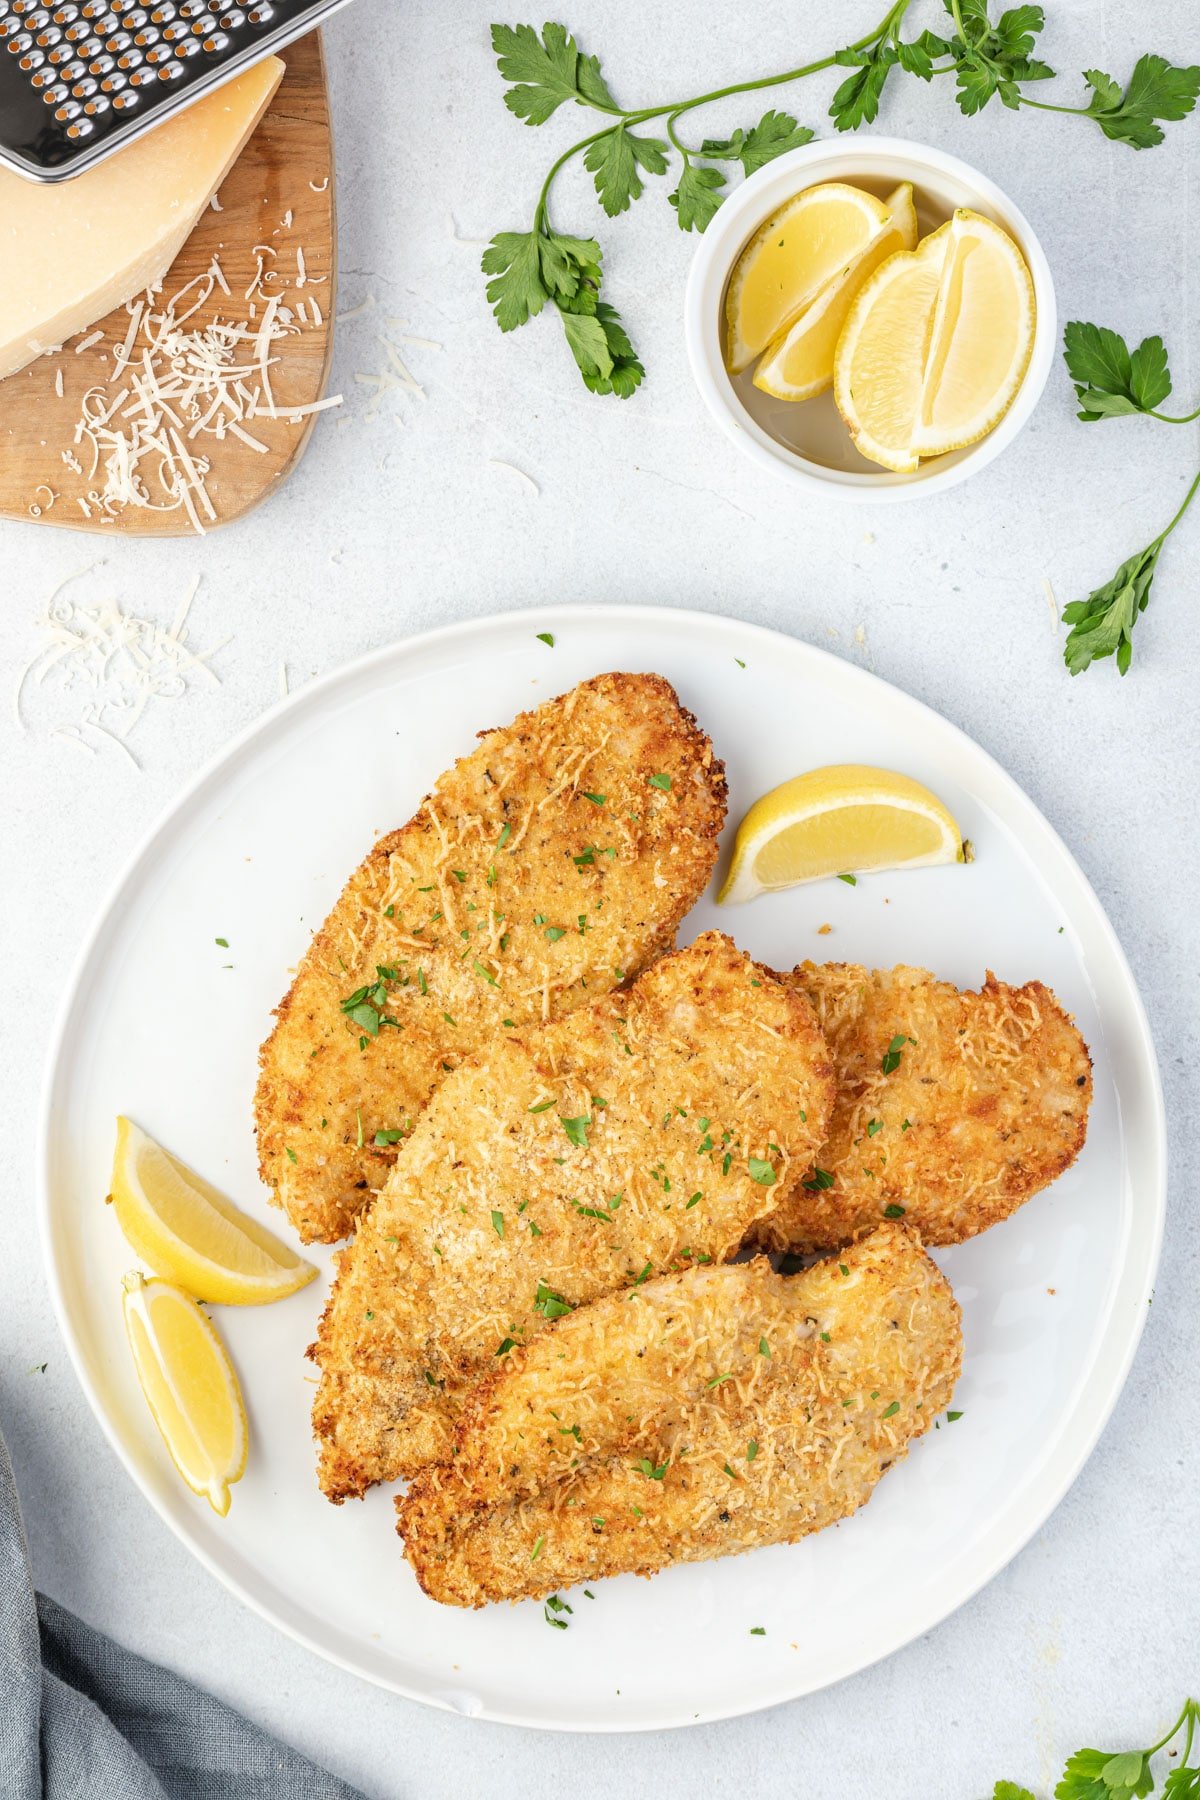 Breaded chicken cutlets on a plate with lemon wedges and parmesan.